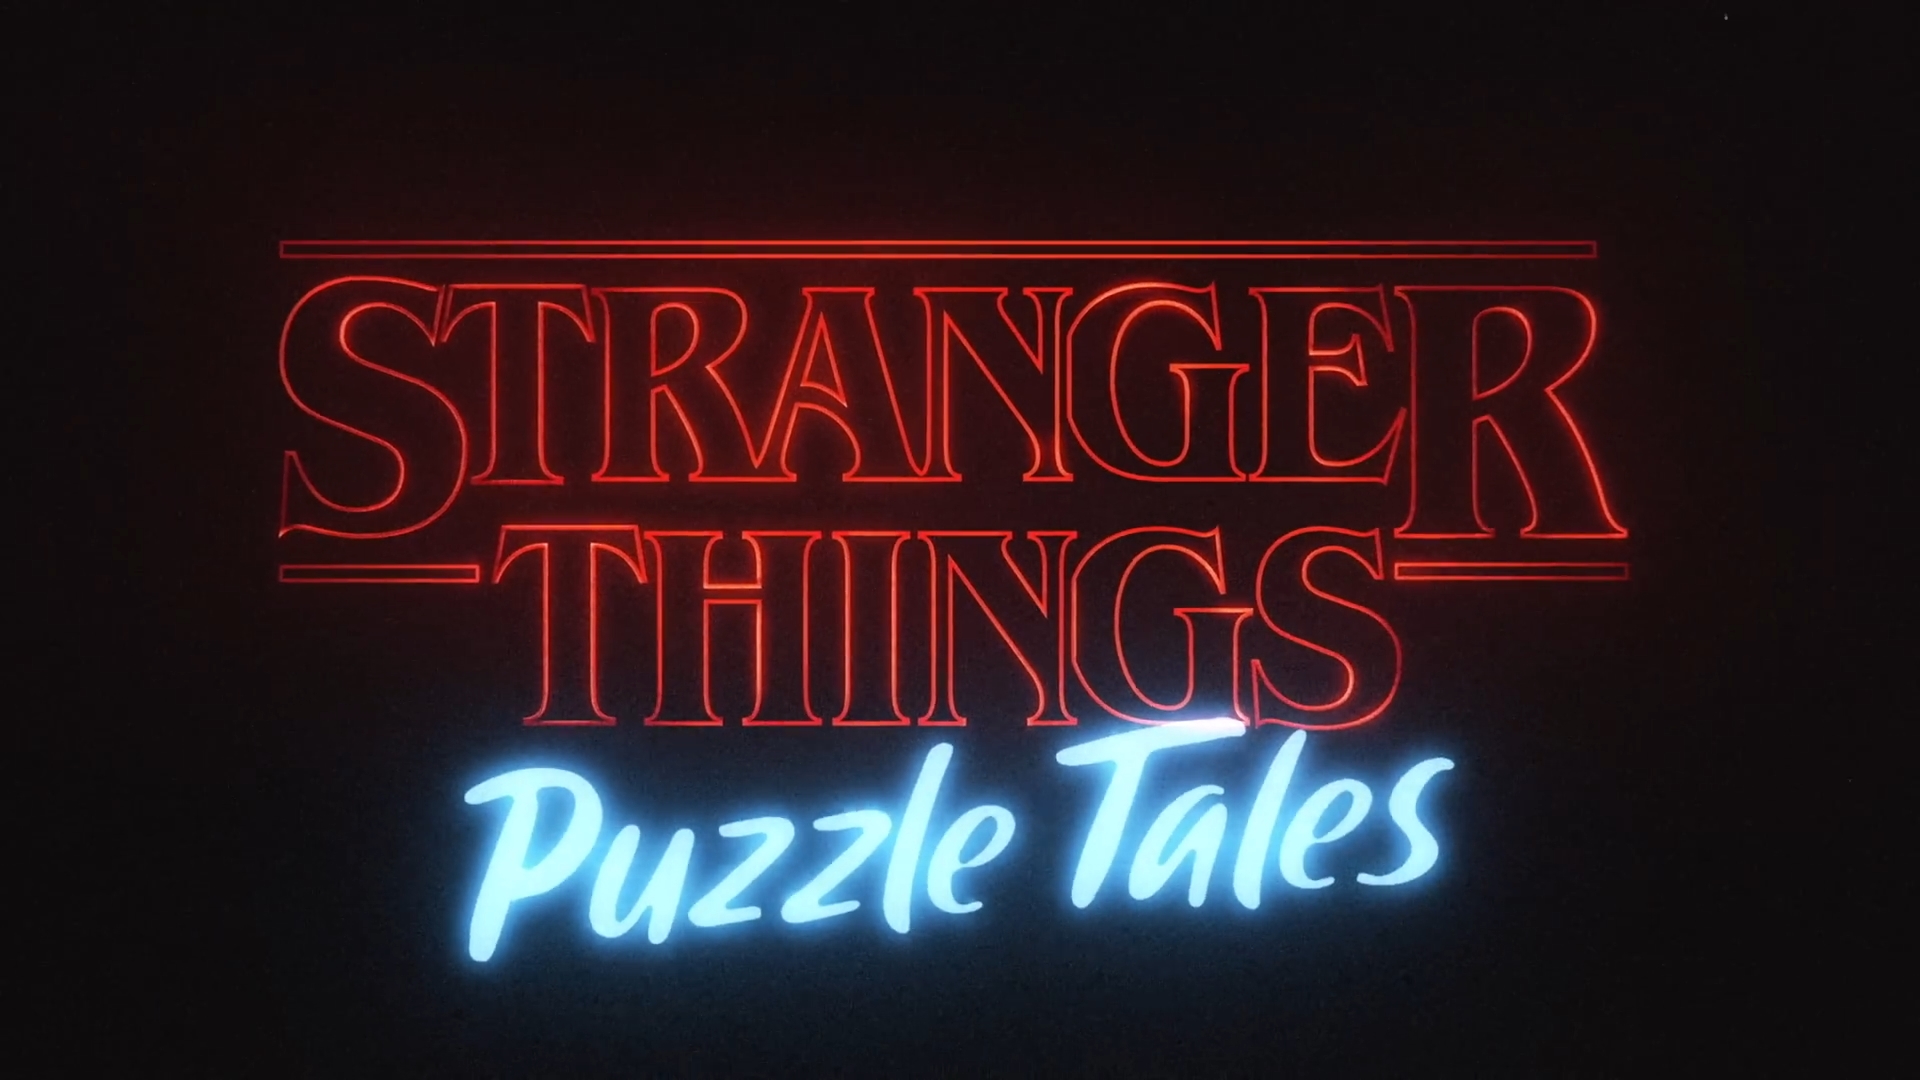 Netflix Games - Stranger Things Puzzle Tales